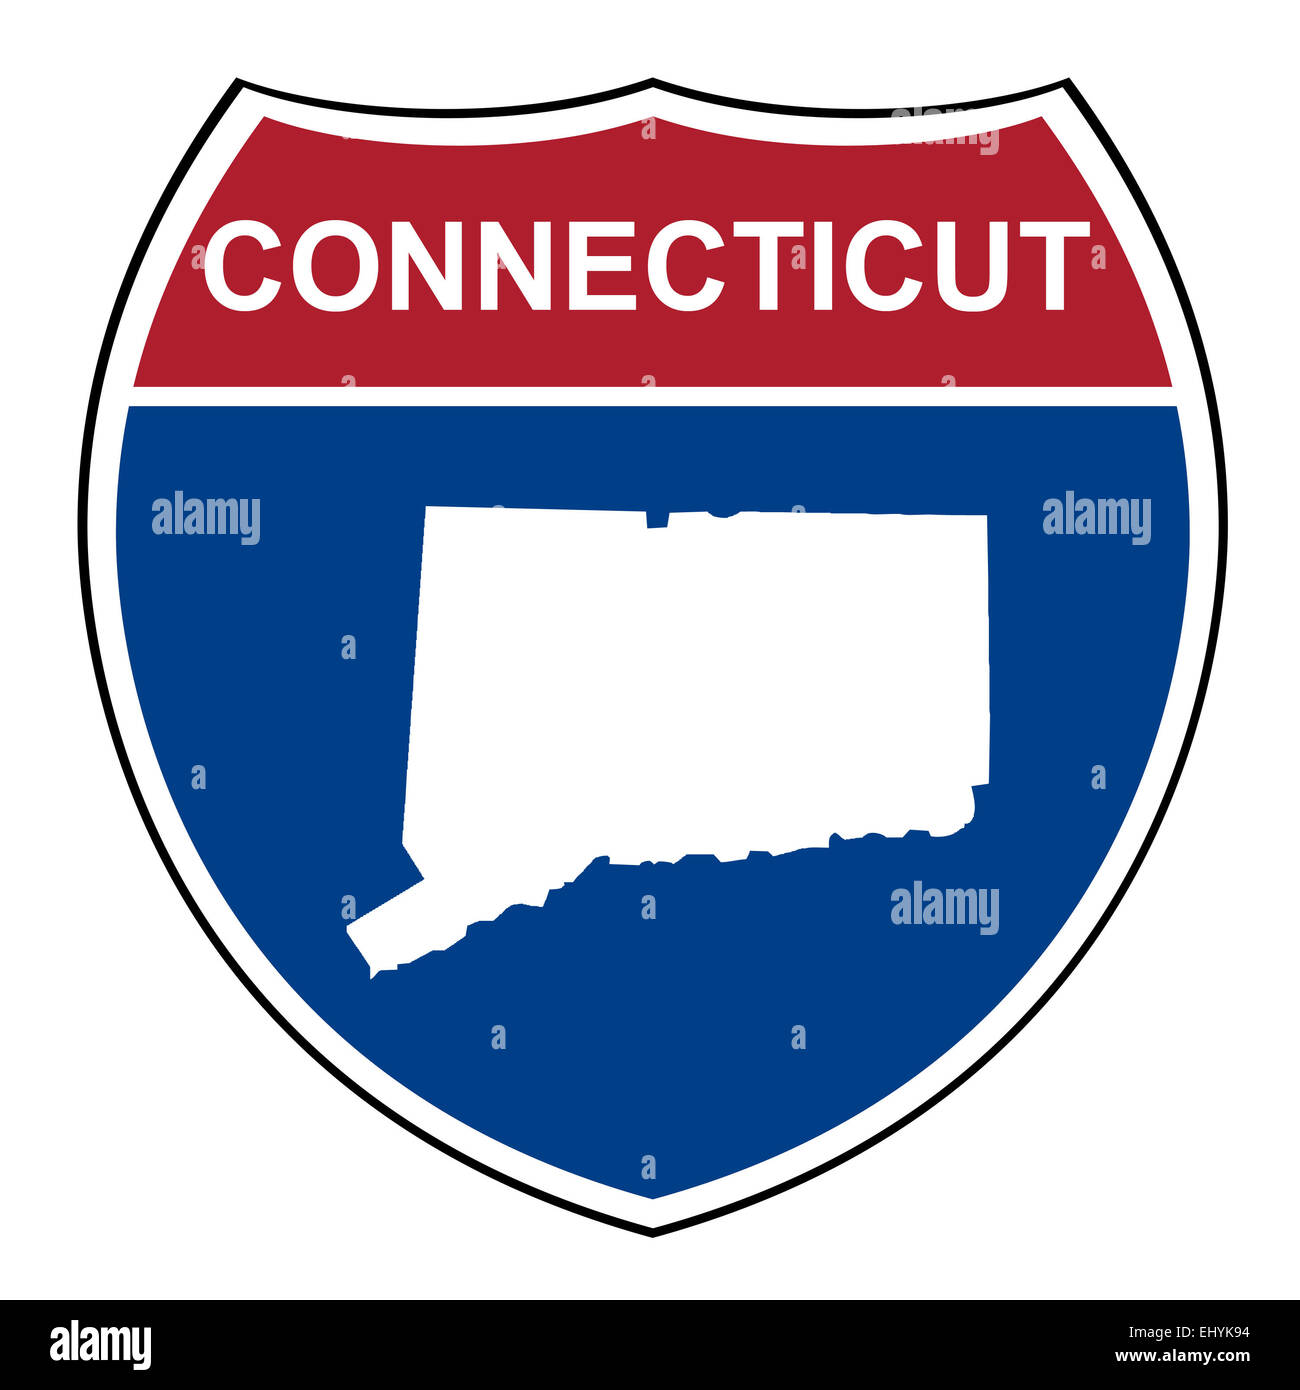 Connecticut American interstate highway road shield isolated on a white background. Stock Photo